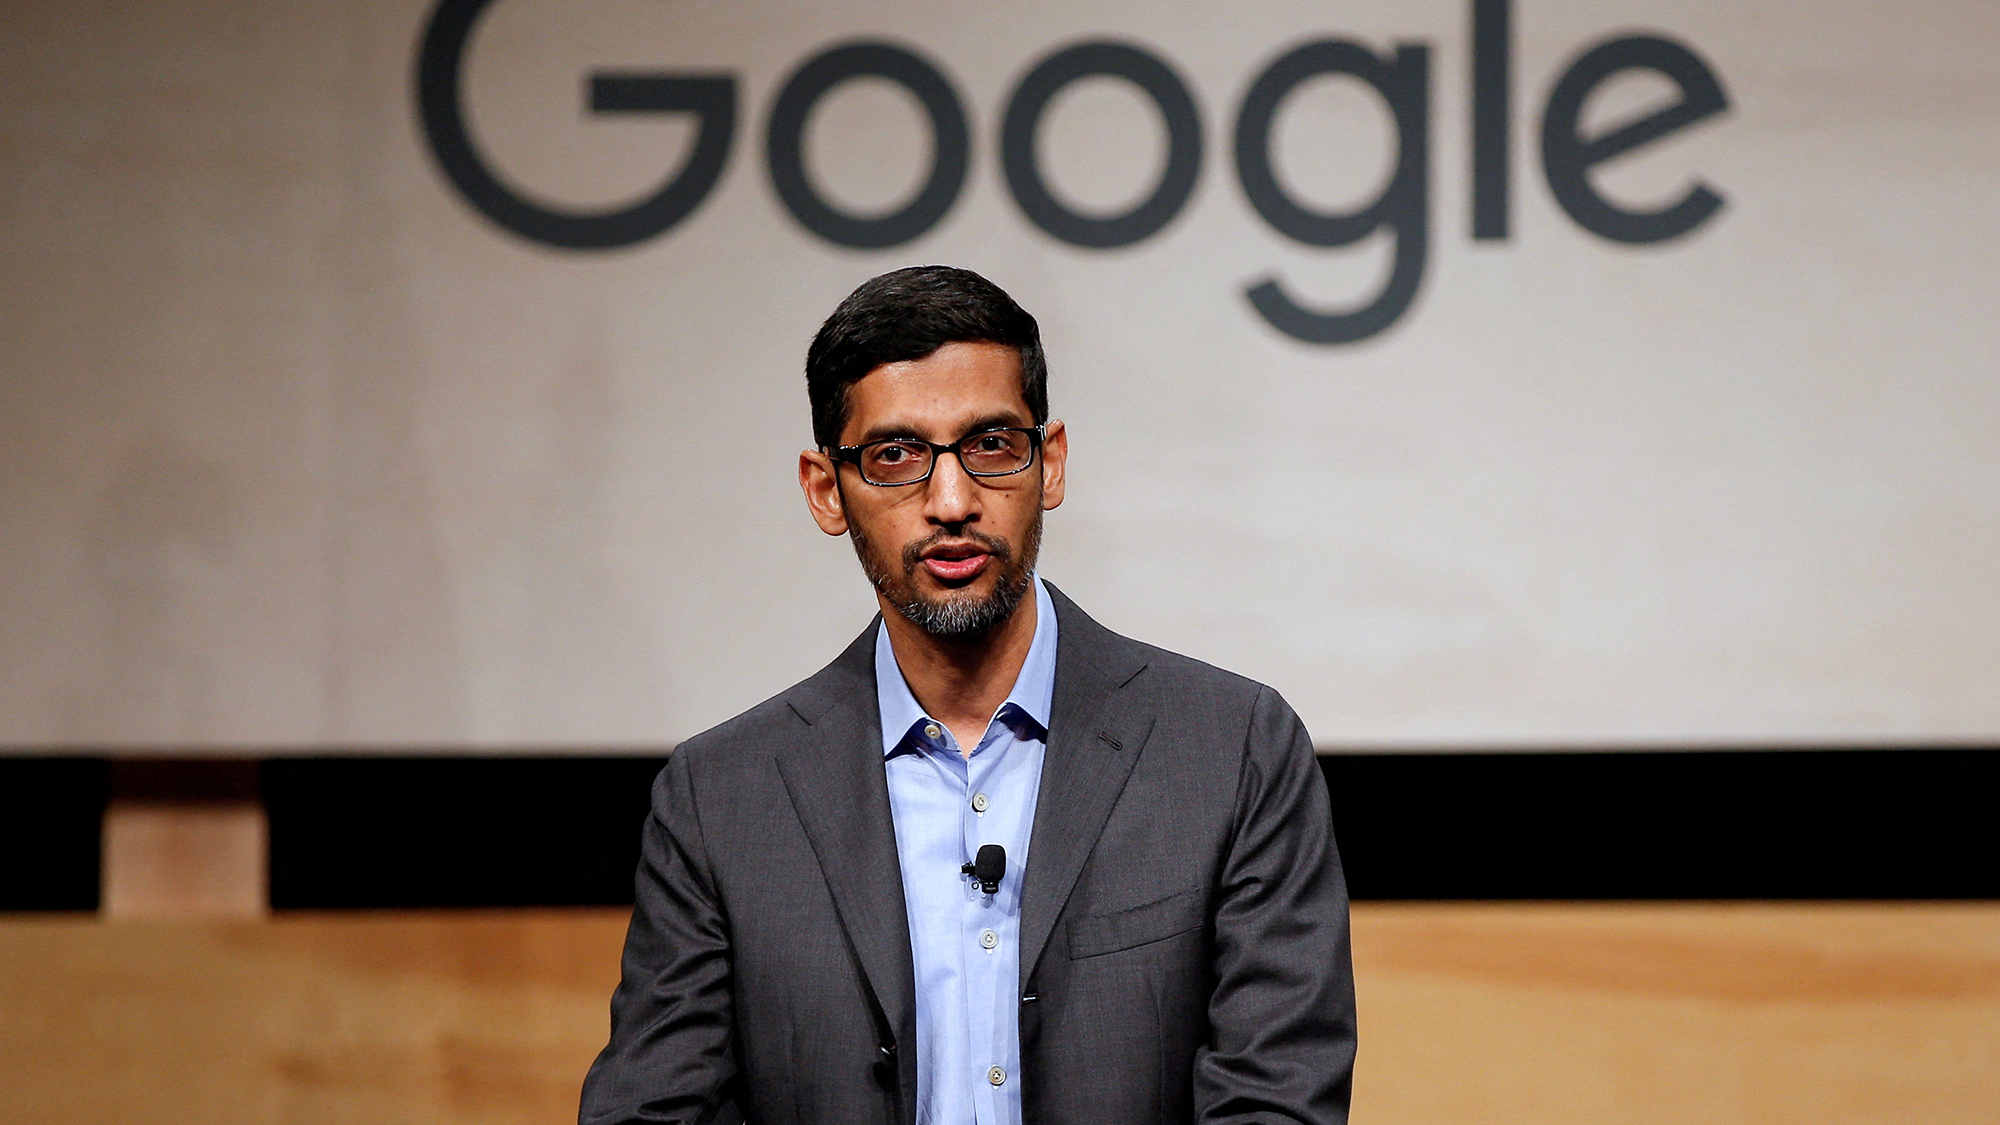 Google CEO Sundar Pichai speaks during a signing ceremony in Dallas, Texas, in October 2019. Google...